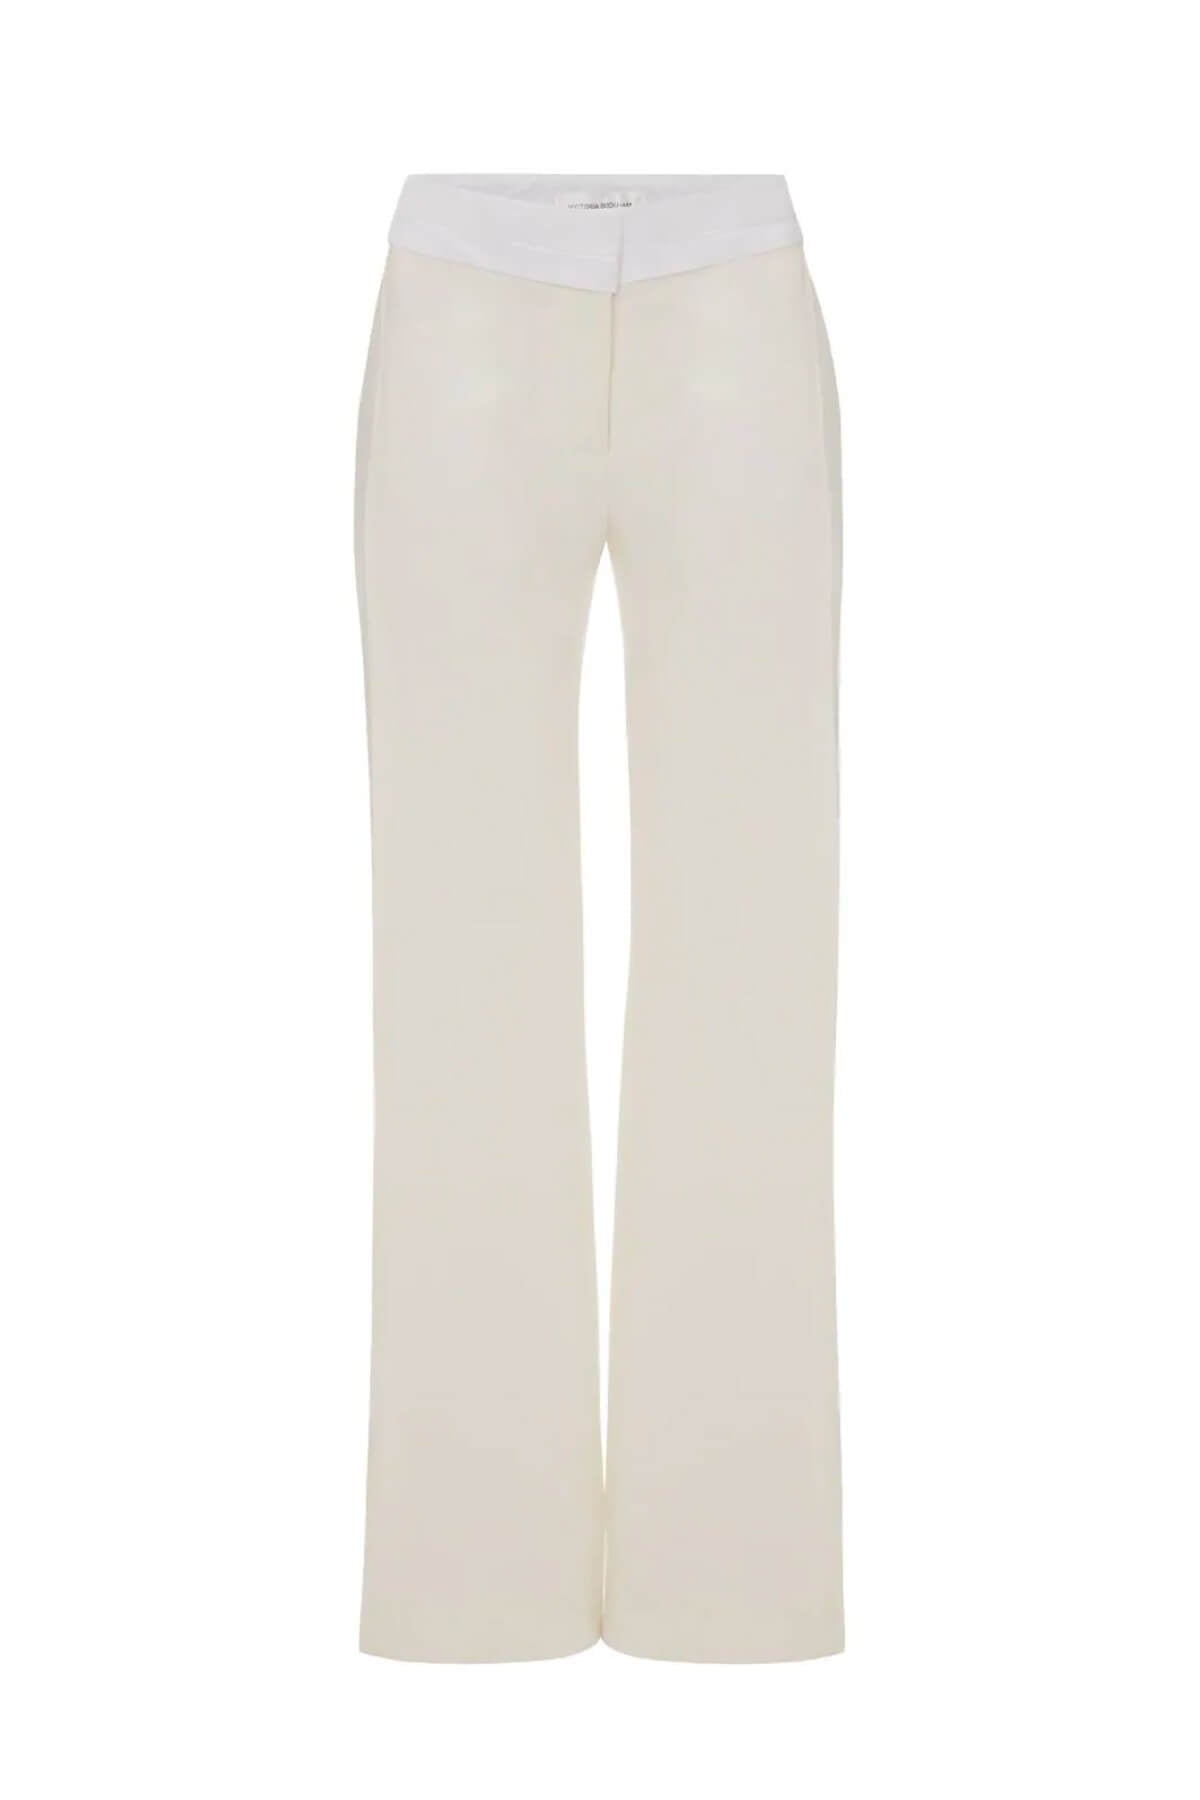 Victoria Beckham Textured Wool Side Panel Trousers - Off White